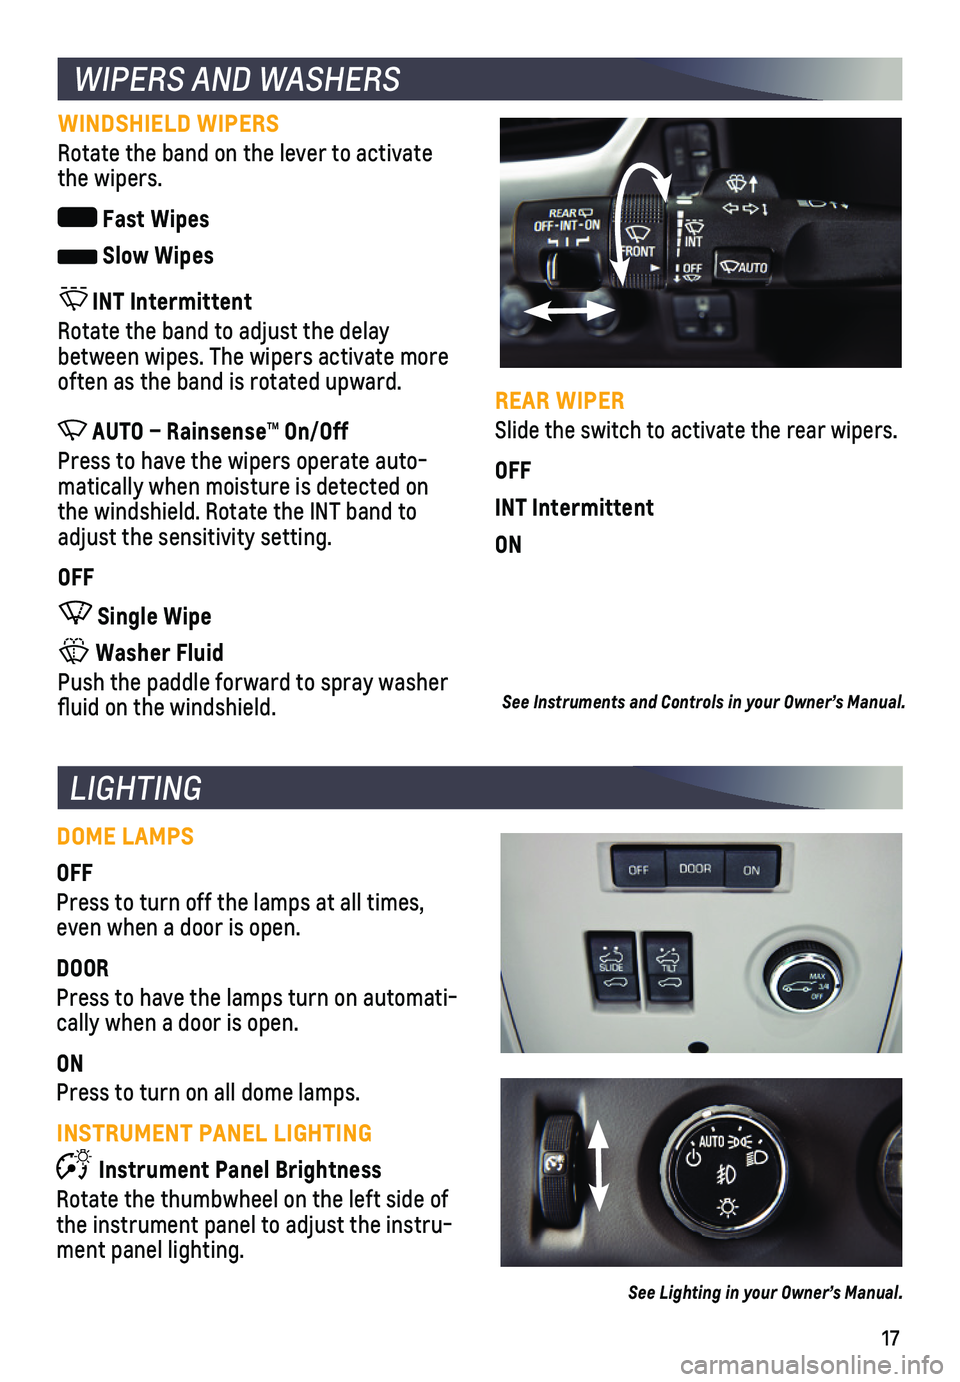 CHEVROLET SUBURBAN 2018  Get To Know Guide 17
WINDSHIELD WIPERS
Rotate the band on the lever to activate the wipers.
 Fast Wipes
 Slow Wipes 
 INT Intermittent
Rotate the band to adjust the delay between wipes. The wipers activate more often 